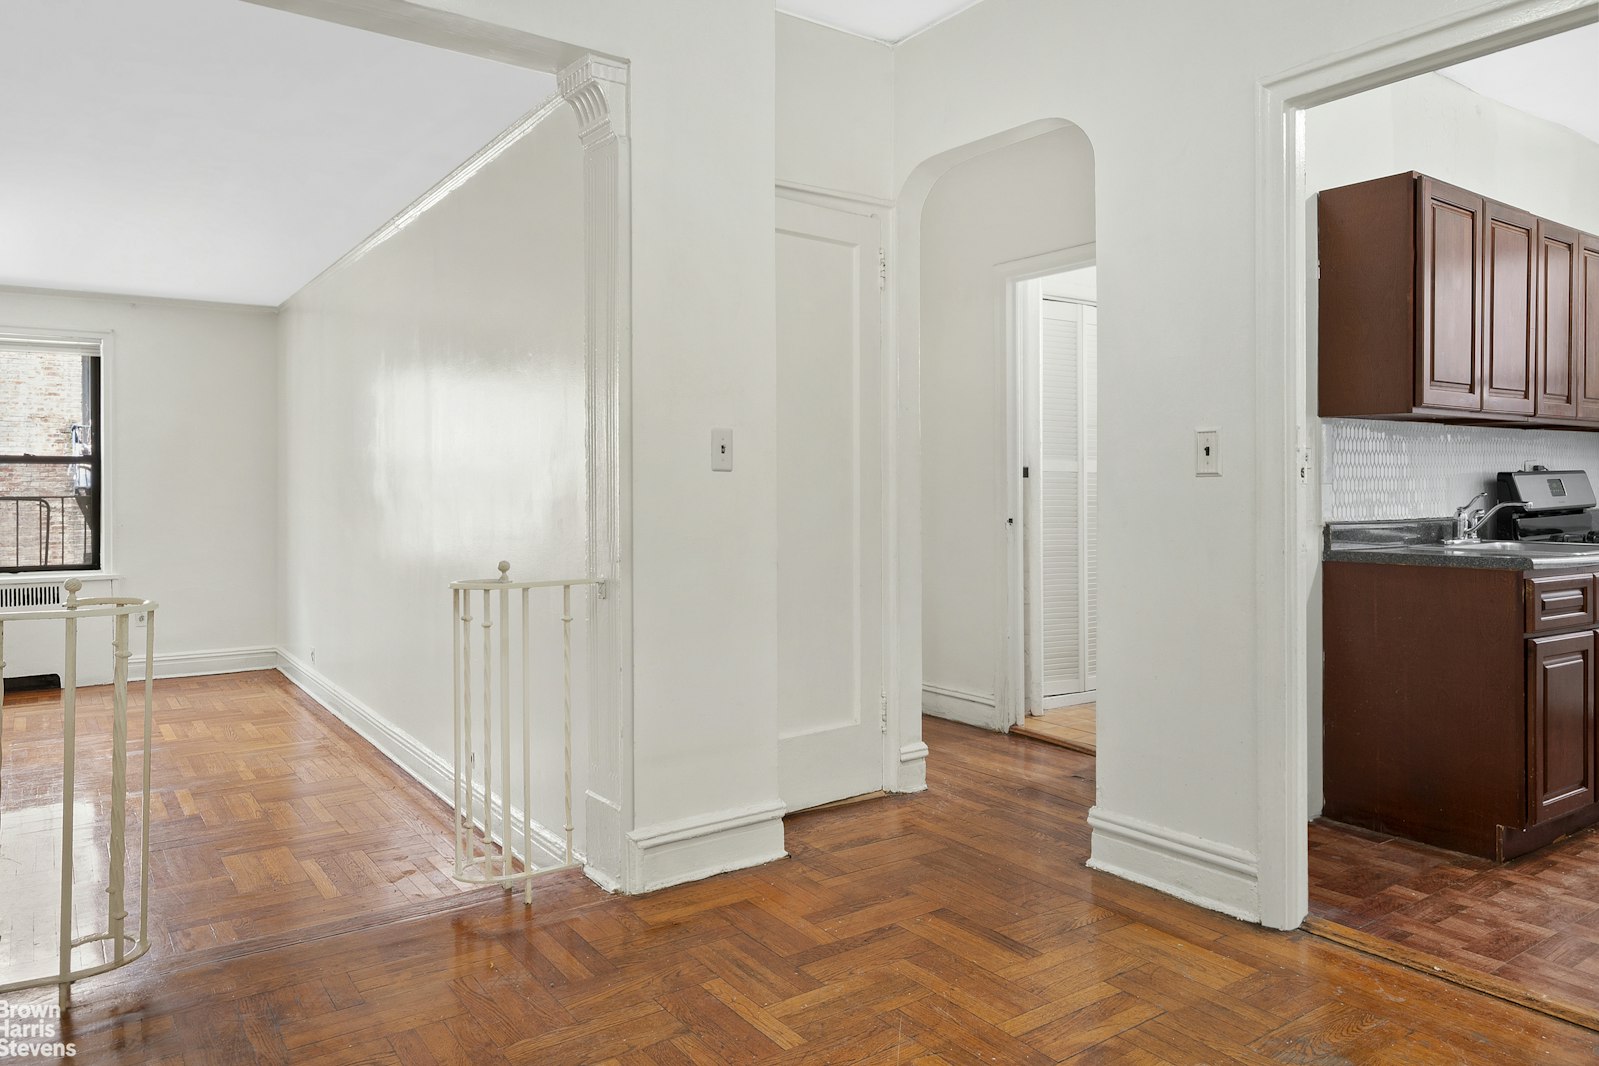 a view of a hallway view with wooden floor and staircase